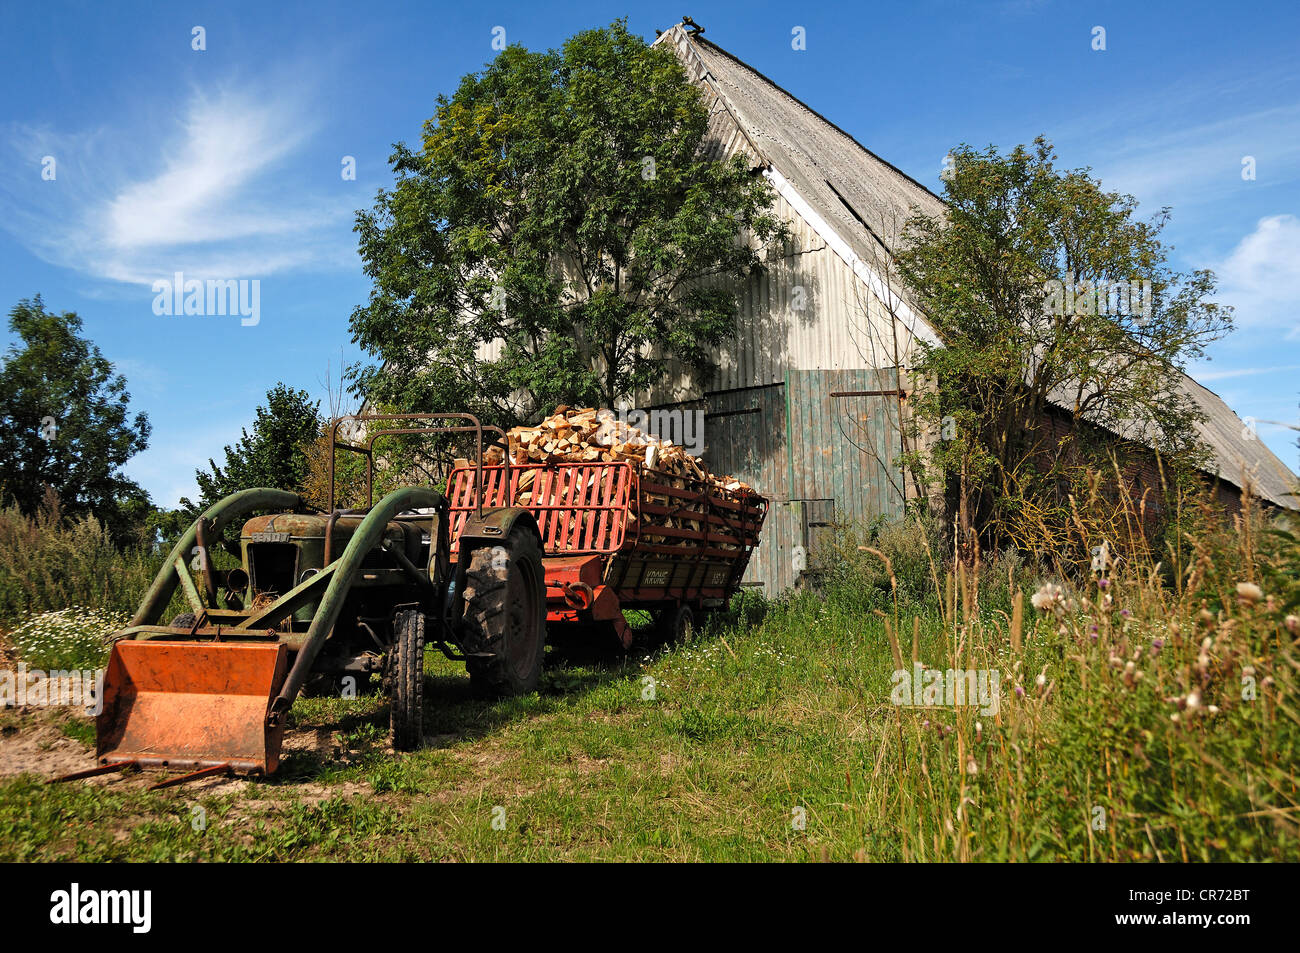 Old tractor with split timber on the loaded wagen, Othenstorf, Mecklenburg-Western Pomerania, Germany, Europe Stock Photo